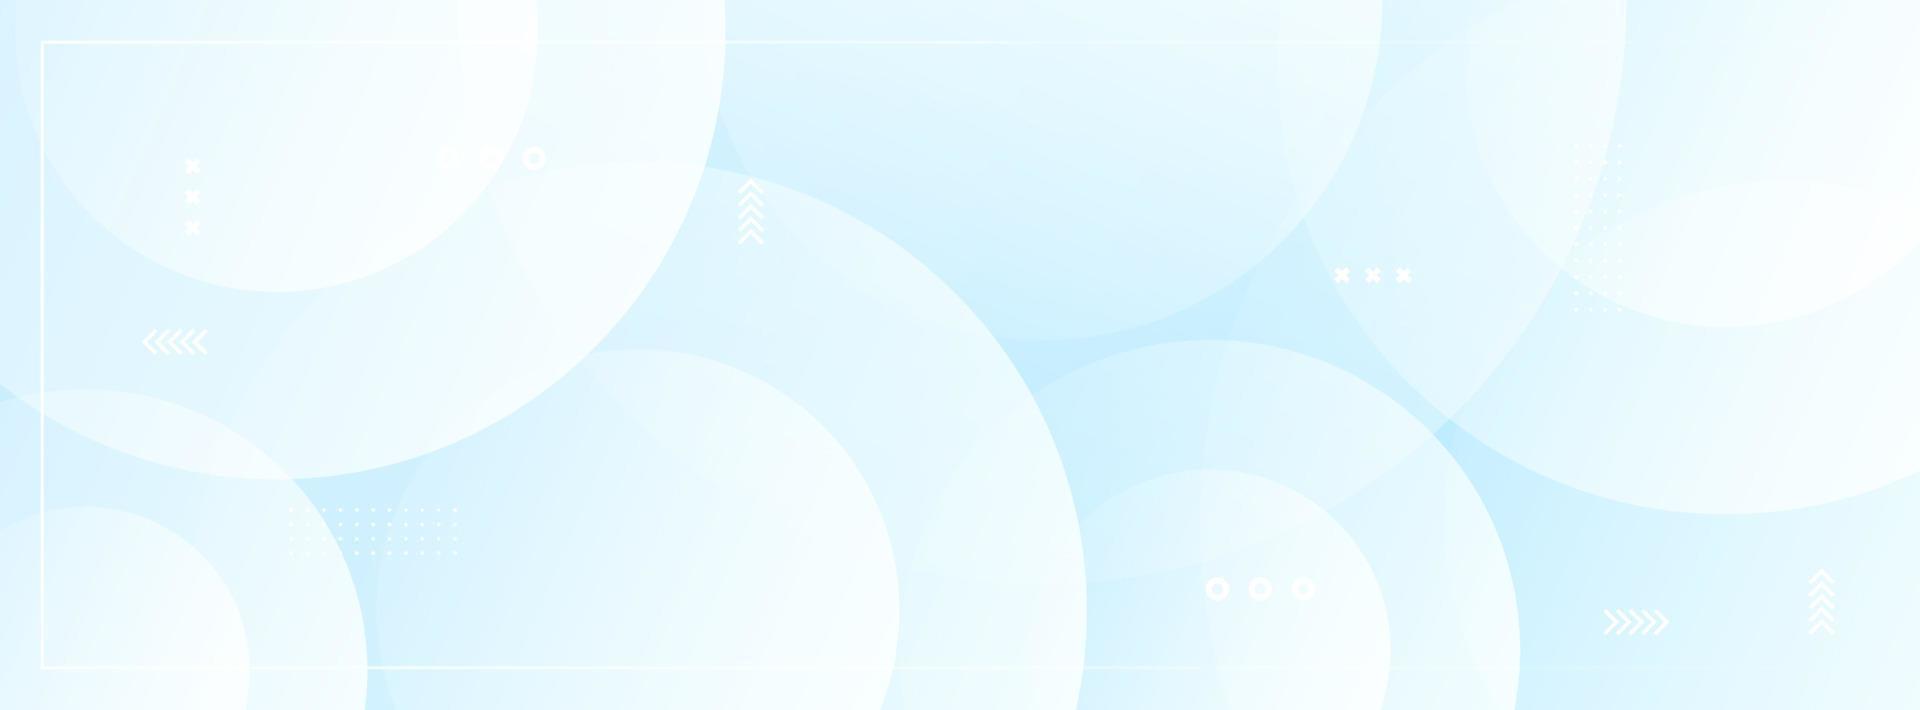 banner background. colorful, fresh blue gradation, circle eps 10 vector